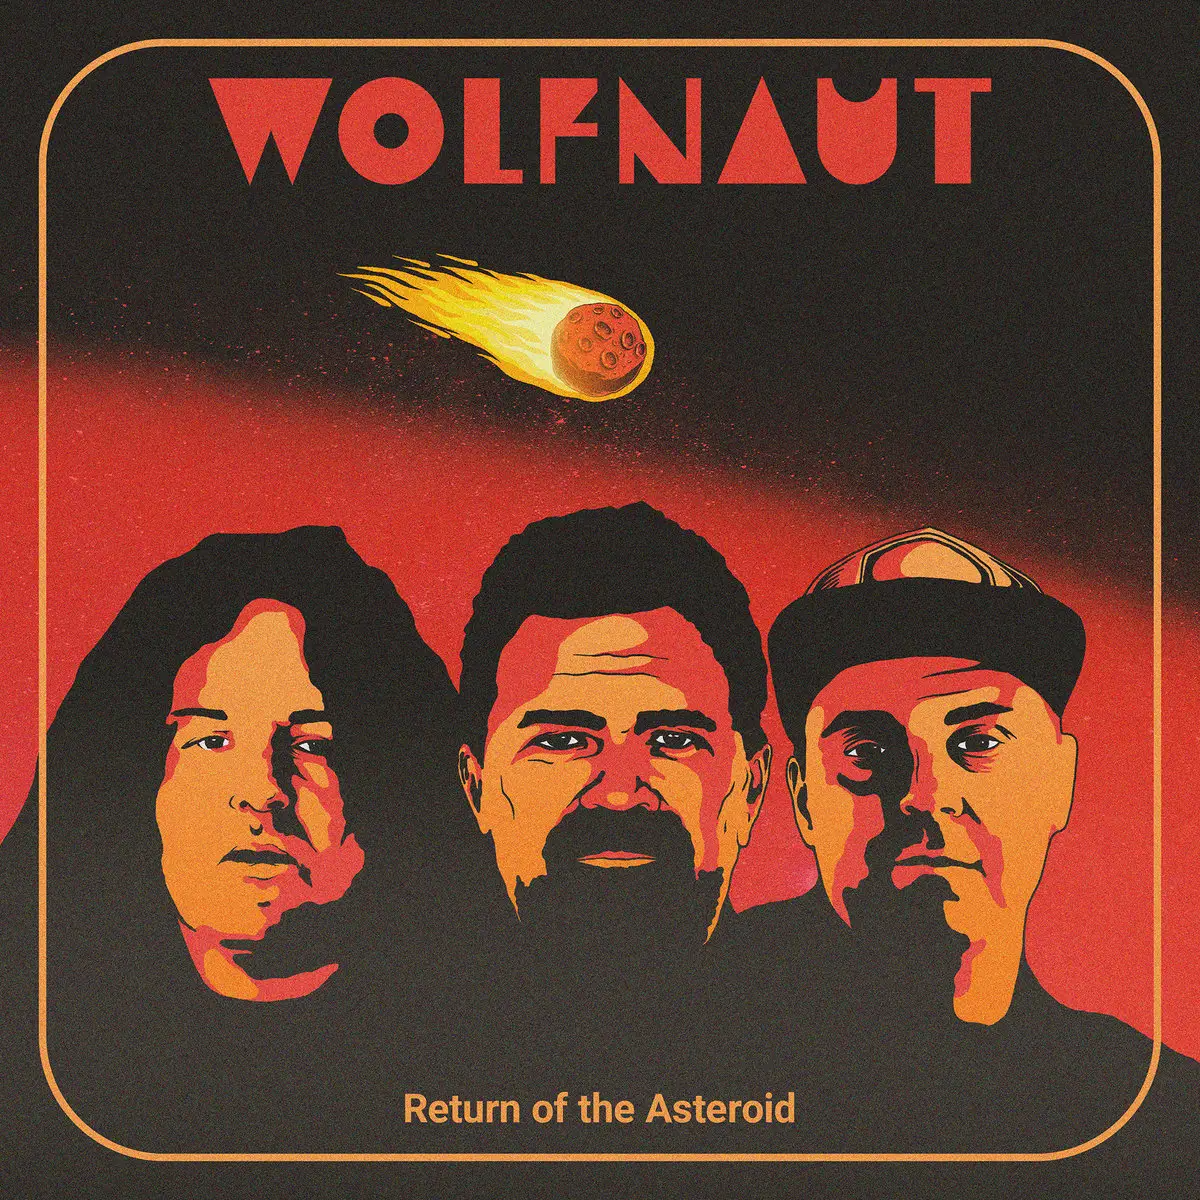 ALBUM REVIEW: Wolfnaut – Return of the Asteroid